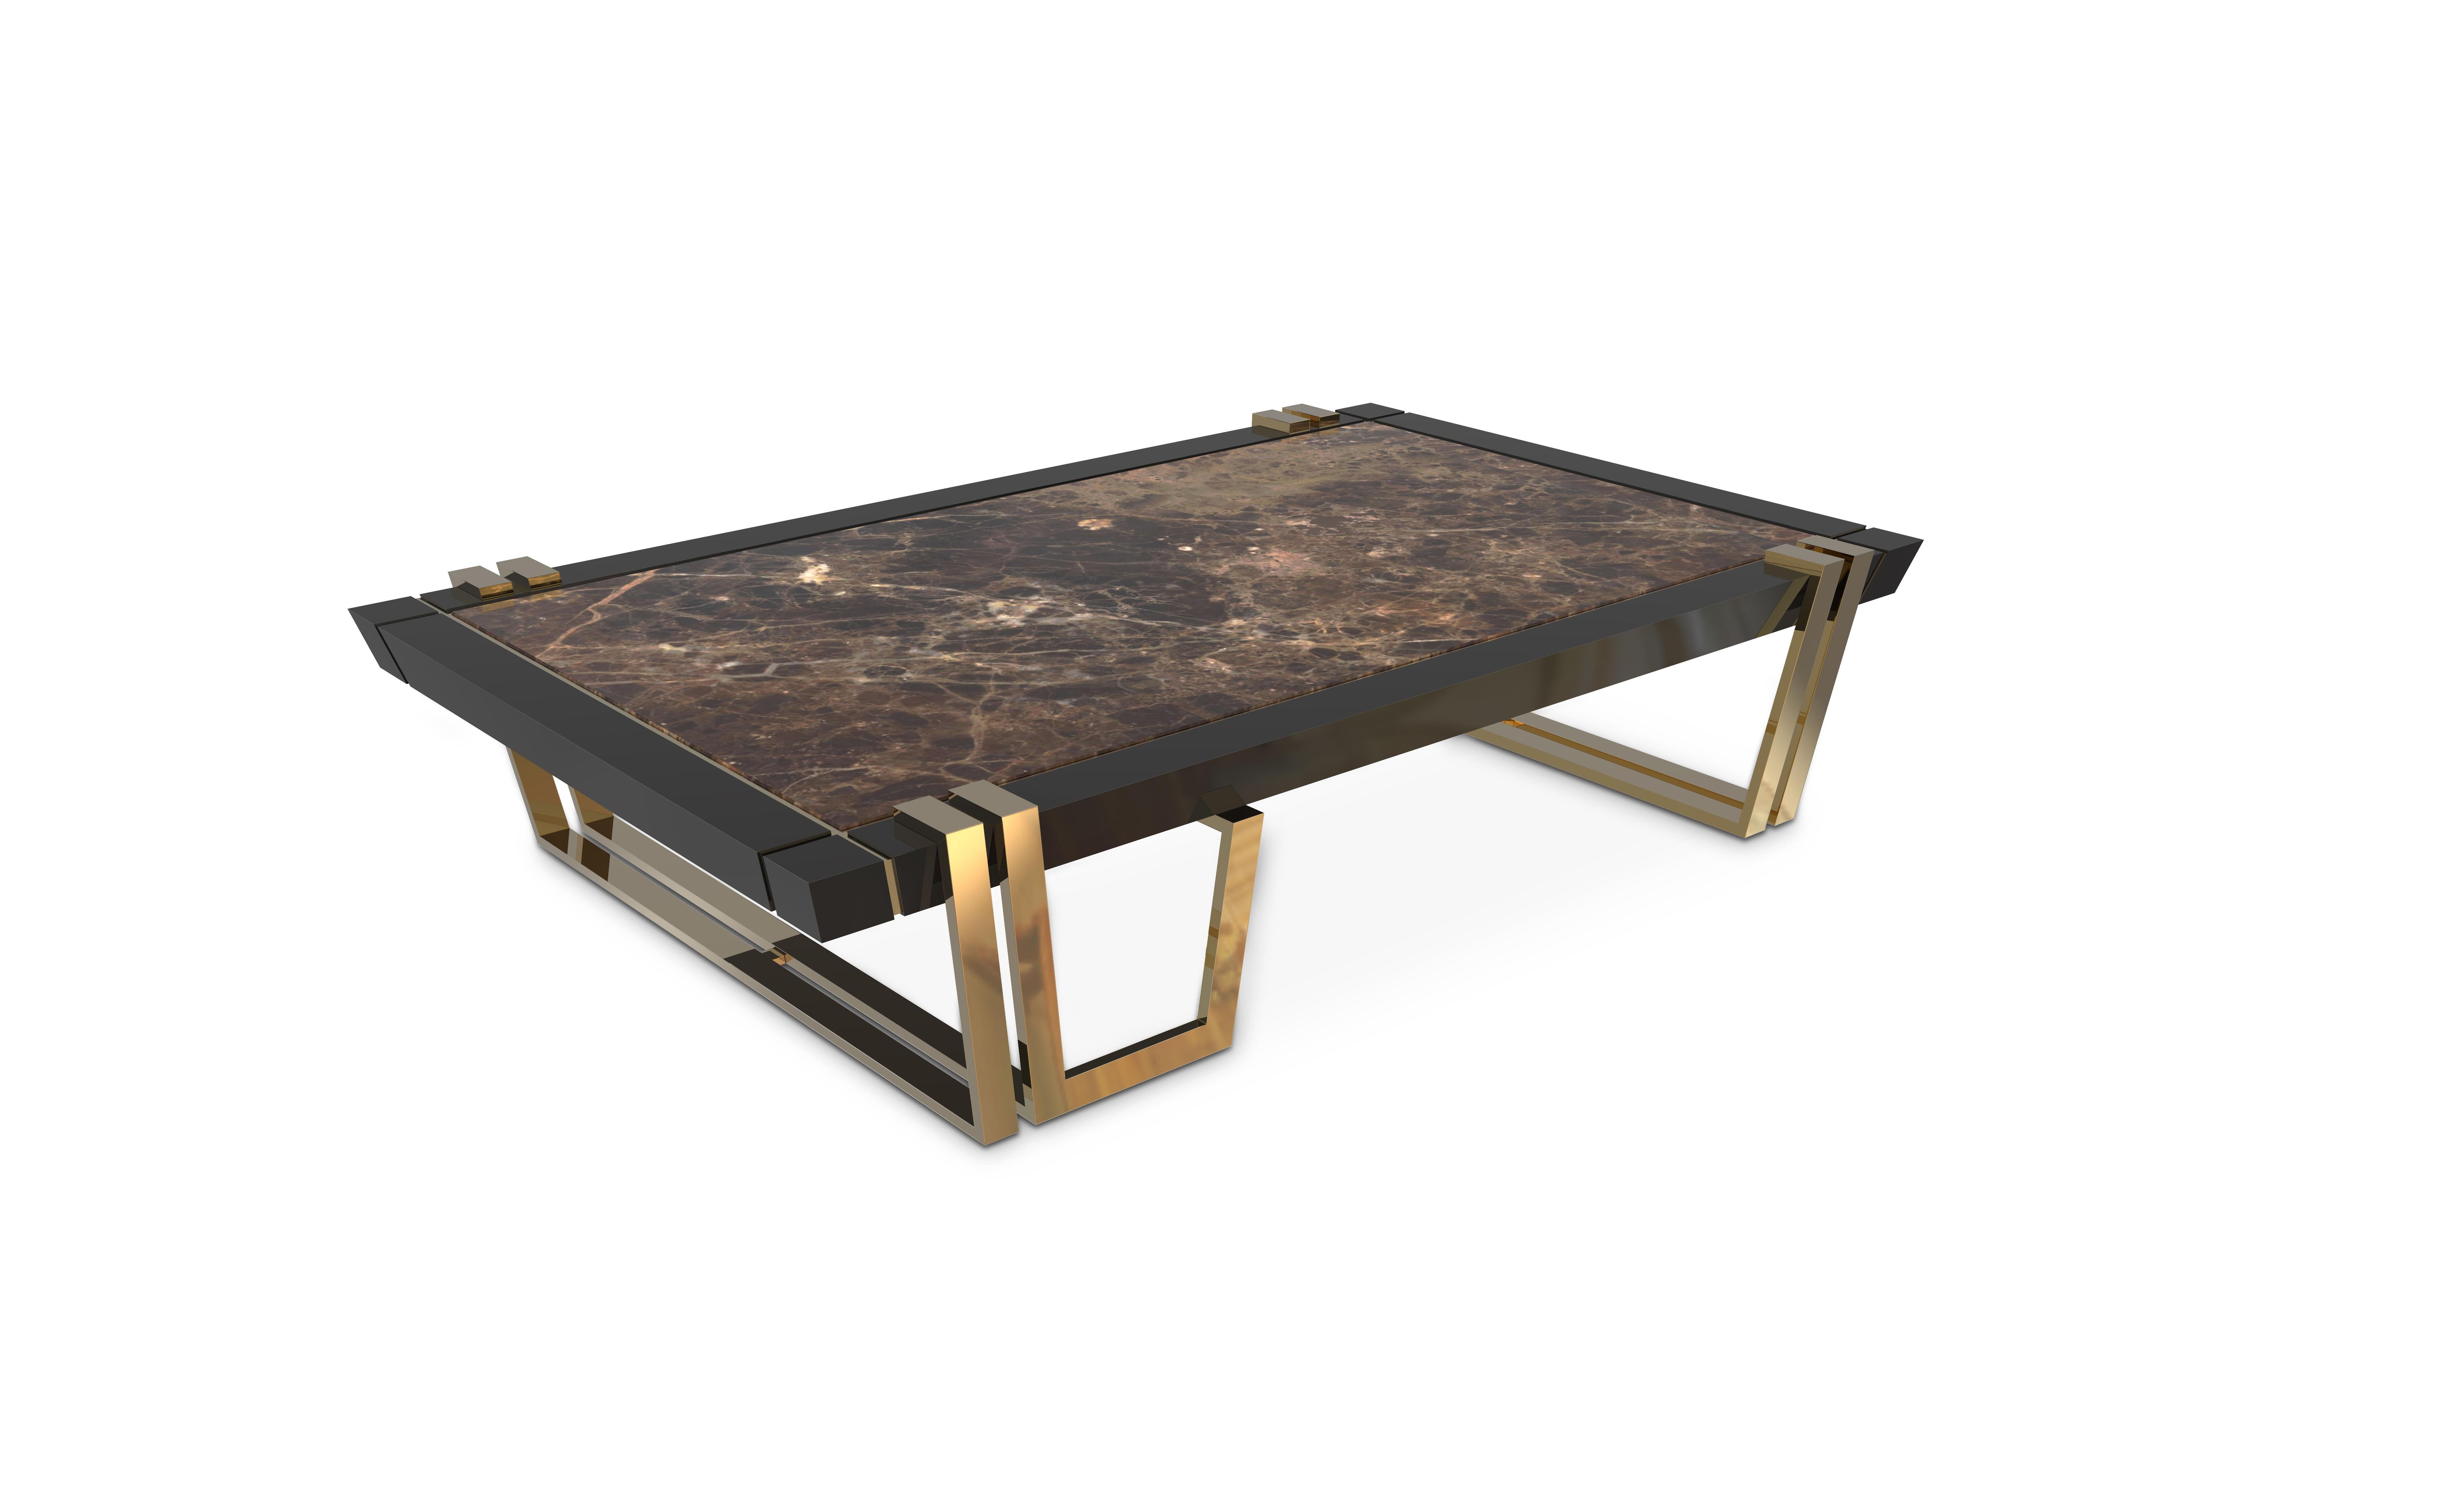 This center table represents a living anthem of sophistication and exclusive design. The Apotheosis will change any division, creating a remarkable and unique atmosphere. This c is center table audacious and splendid harmony between the finest